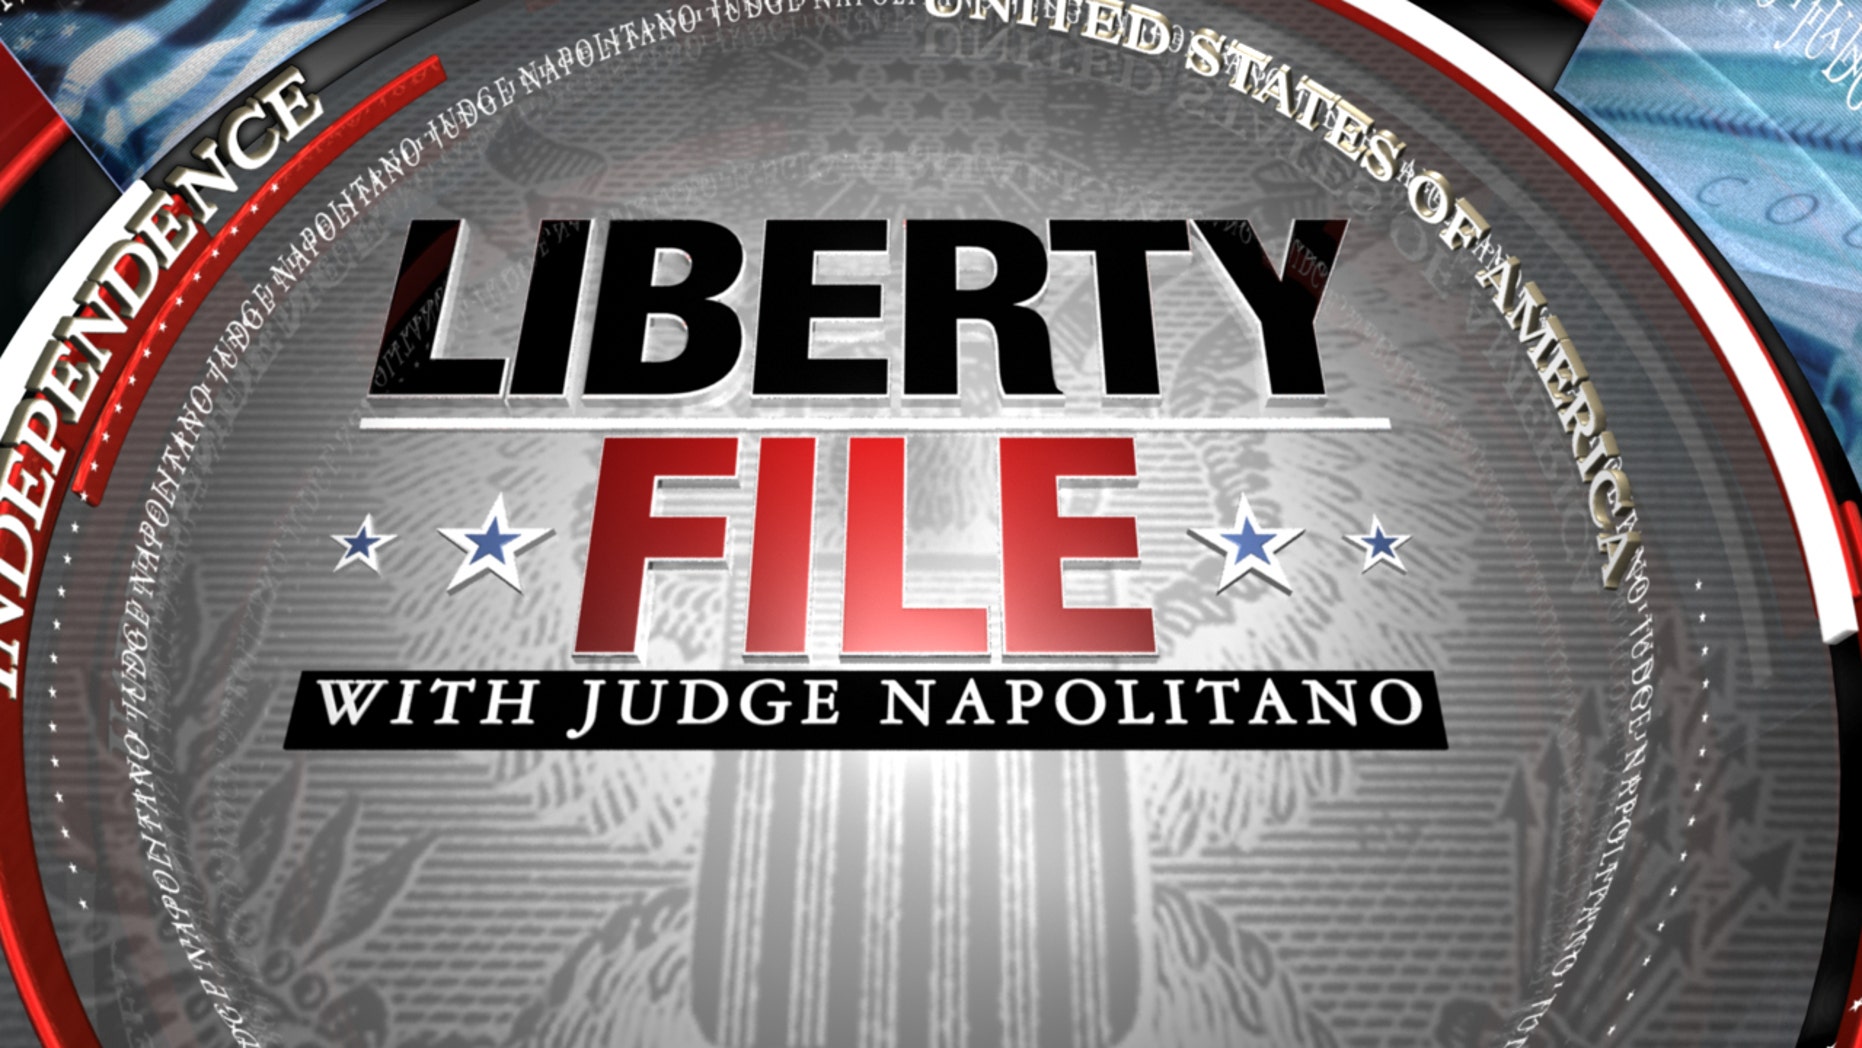 Judge Andrew Napolitano: The Roger Stone arrest and your government